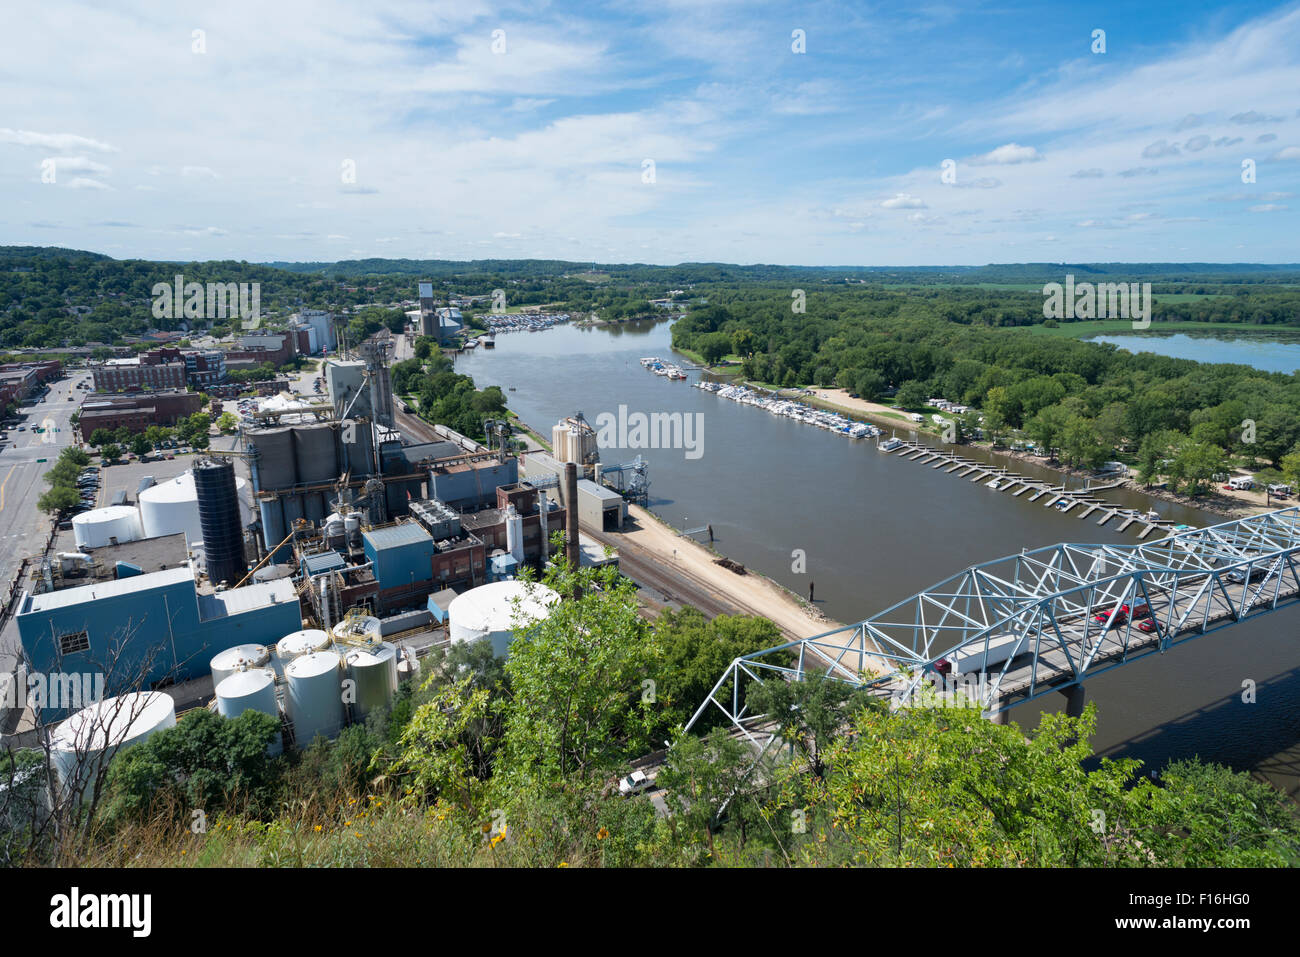 The Mississipi river at Red Wing. Minnesota. USA. Stock Photo